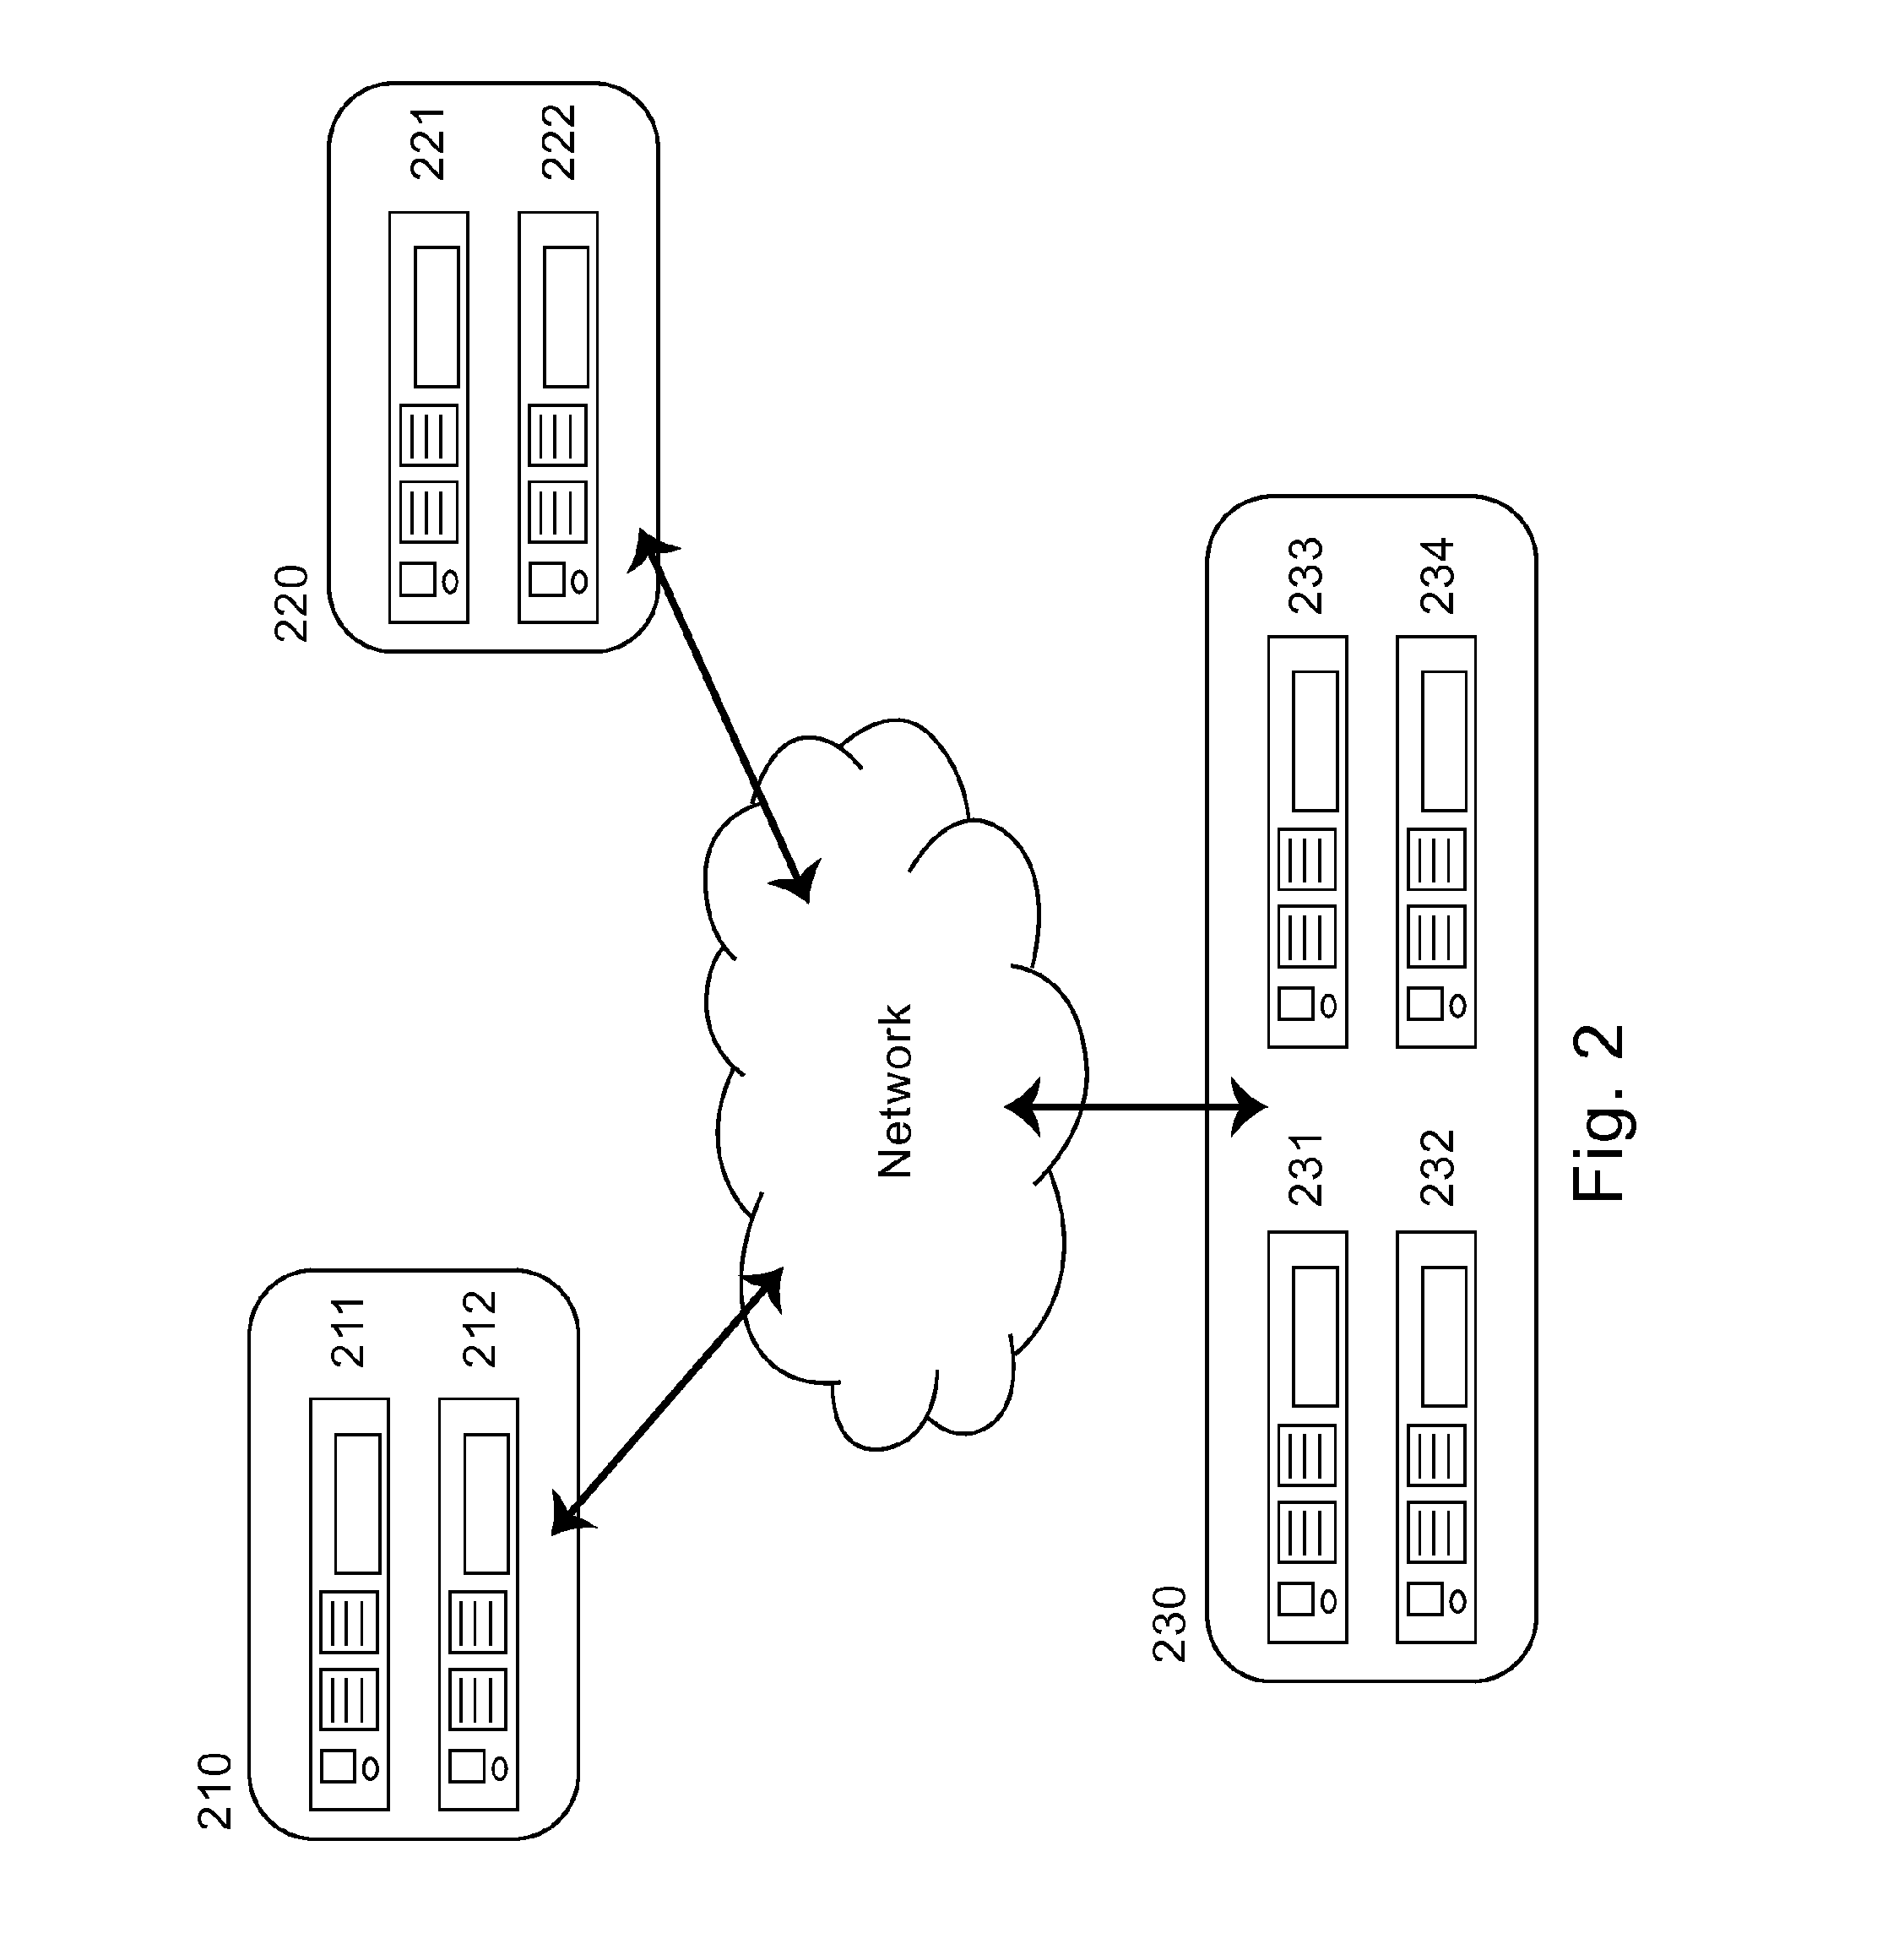 Methods and systems for dynamic adjustment of session parameters for effective video collaboration among heterogeneous devices